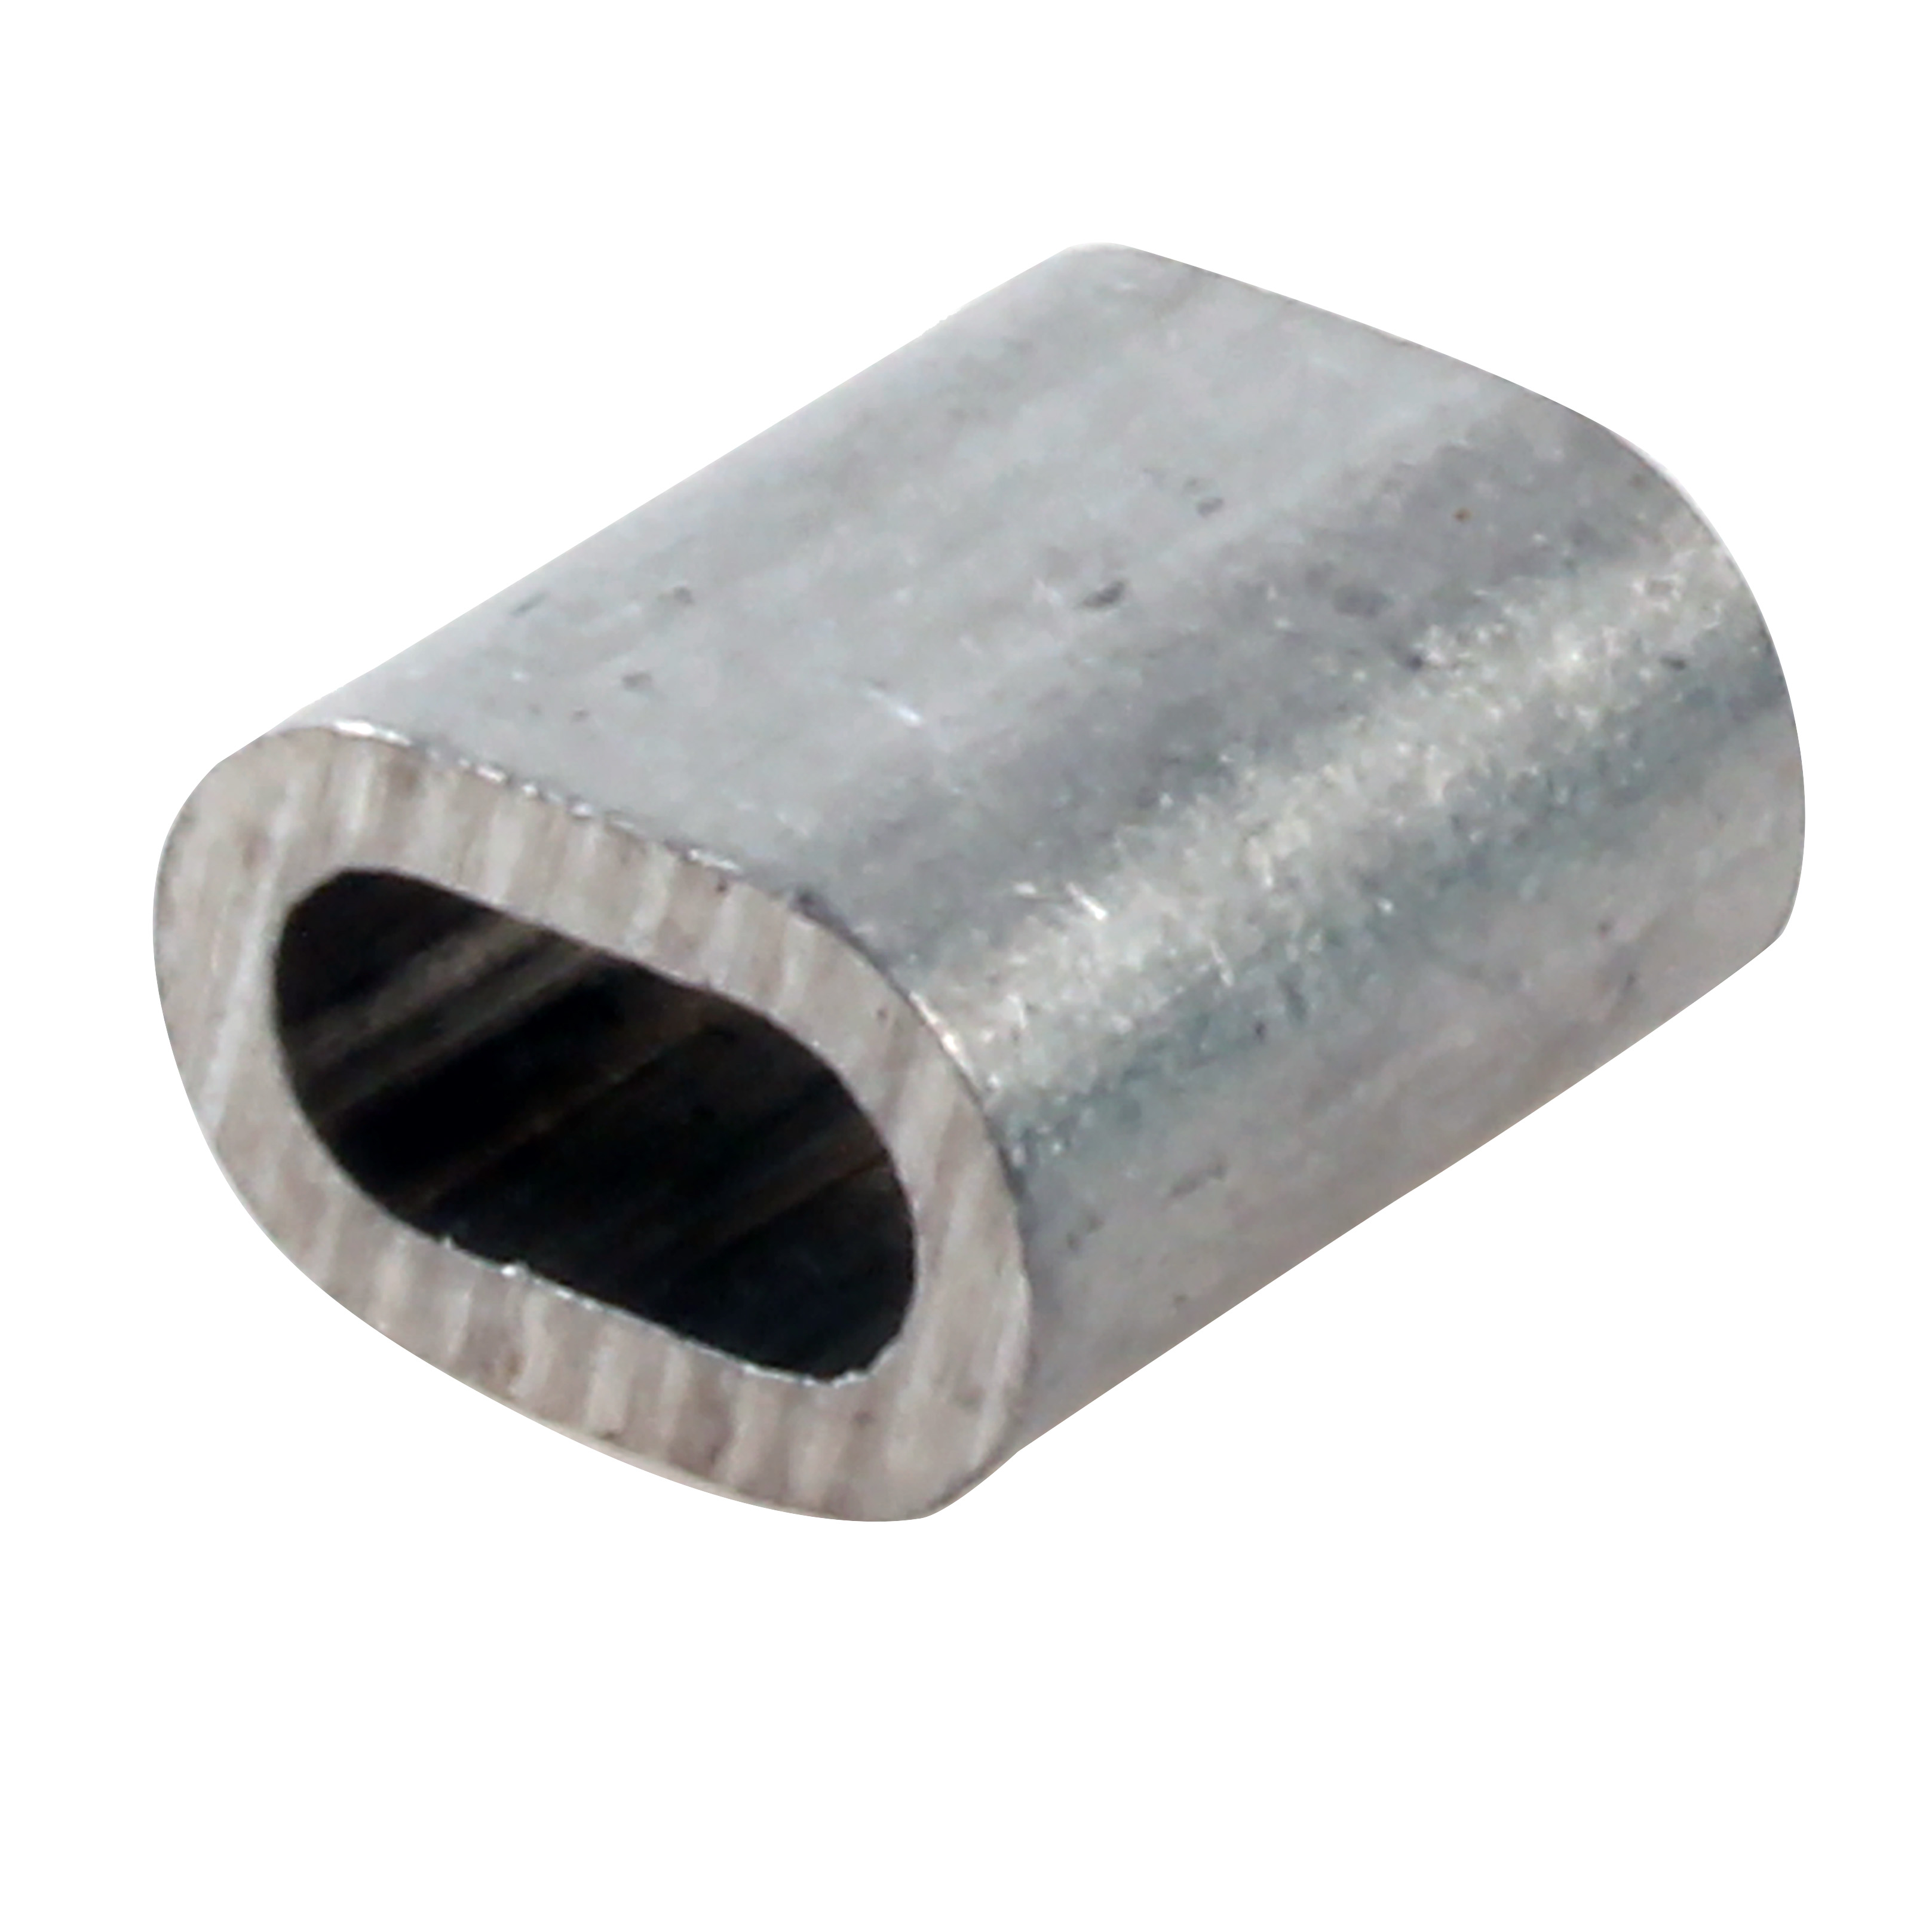 Swaging sleeve for fitting cable - To crimp a wire rope - Crude Aluminium - max 100°C